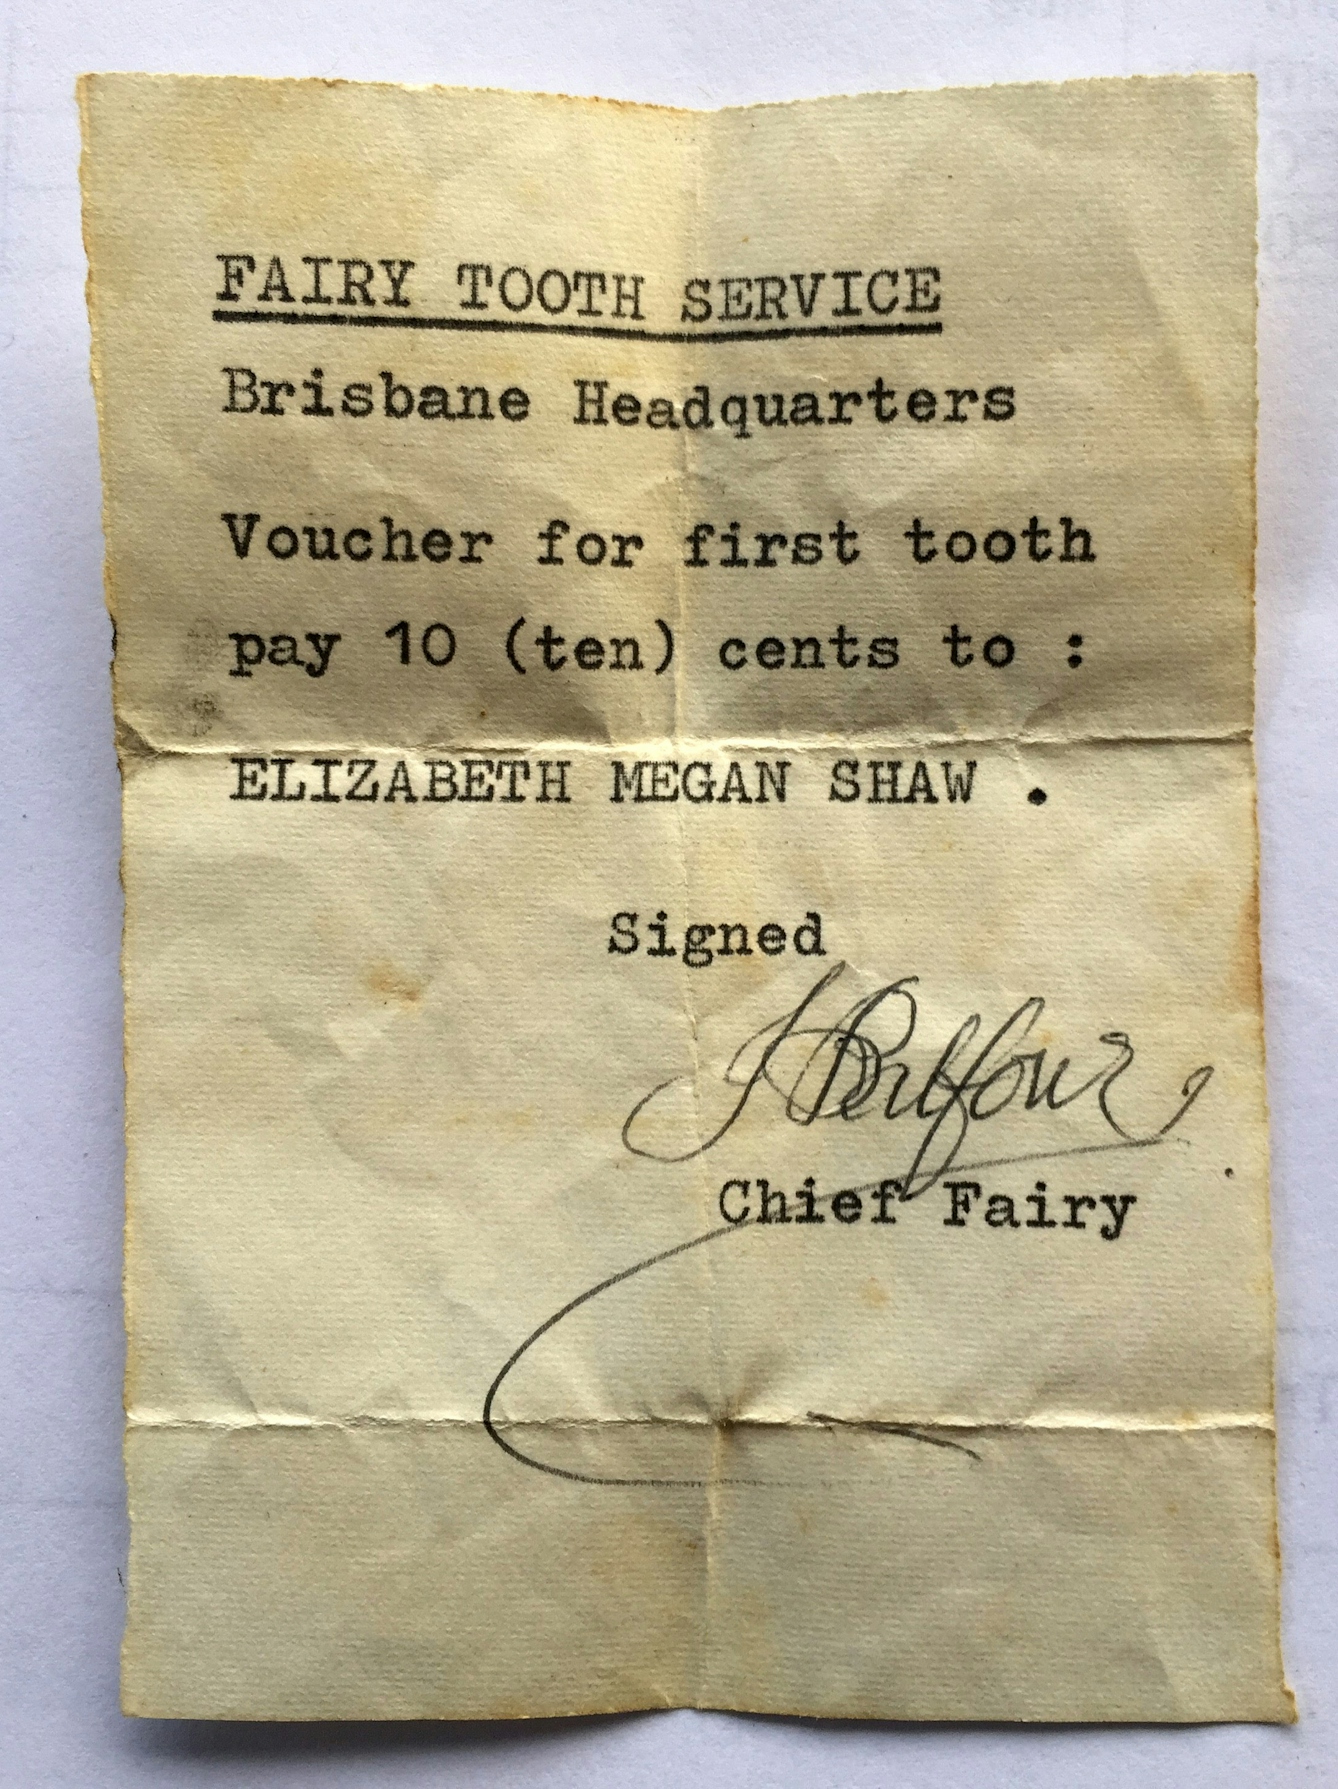 Letter typewritten in black ink on cream paper. Signed by hand in black ink with a flourish. Reads: FAIRY TOOTH SERVICE, Brisbane Headquarters. Voucher for first tooth, pay 10 (ten) cents to: ELIZABETH MEGAN SHAW. Signed J. Balfour, Chief Fairy. 